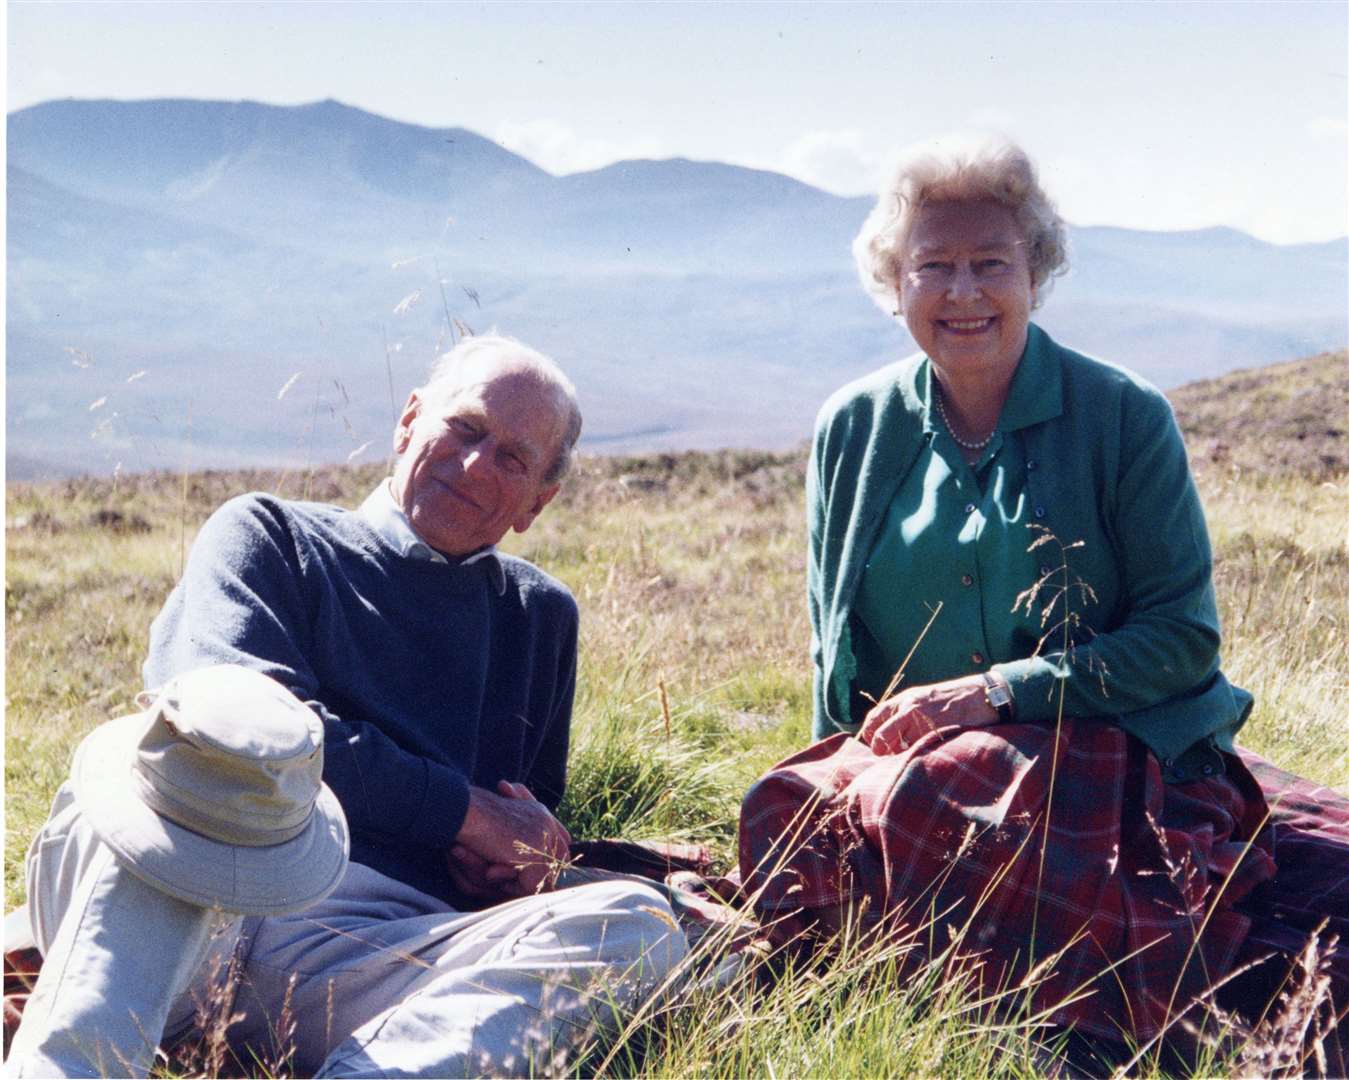 A personal photograph of the Queen and the Duke of Edinburgh at the top of the Coyles of Muick from 2003 (The Countess of Wessex/PA)